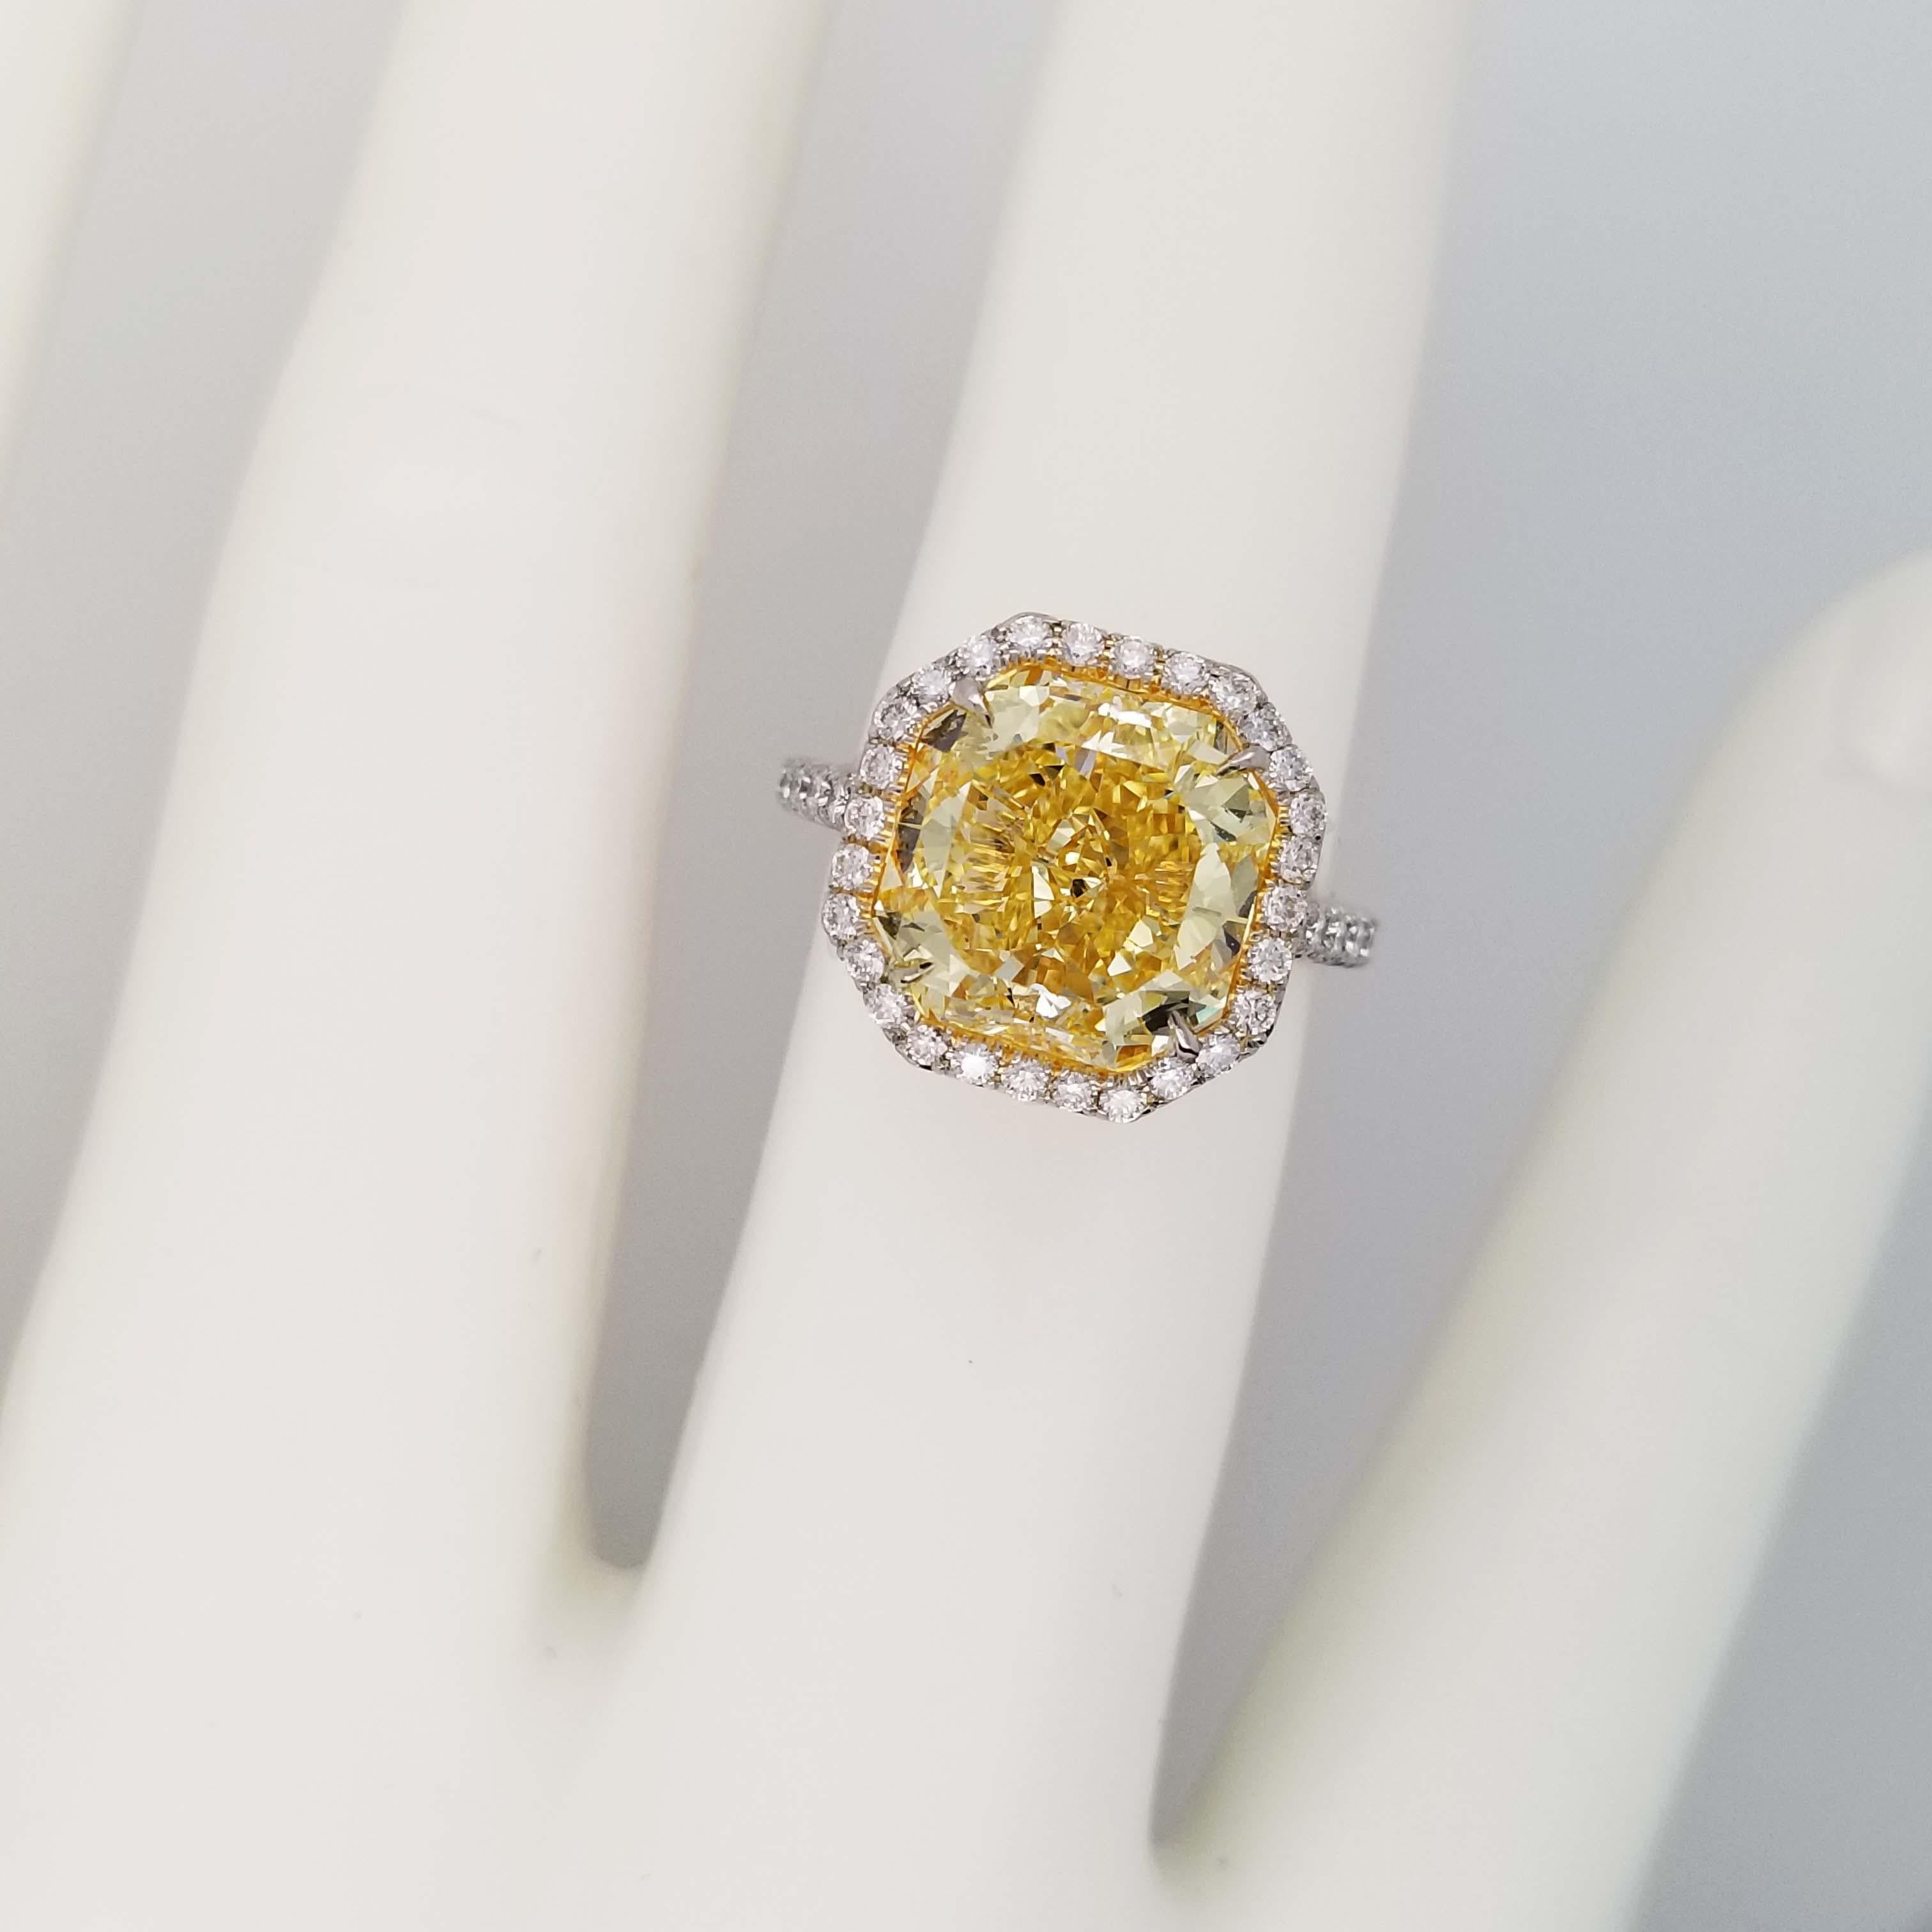 Contemporary Scarselli 6 Carat Fancy Yellow Diamond Ring in Platinum For Sale